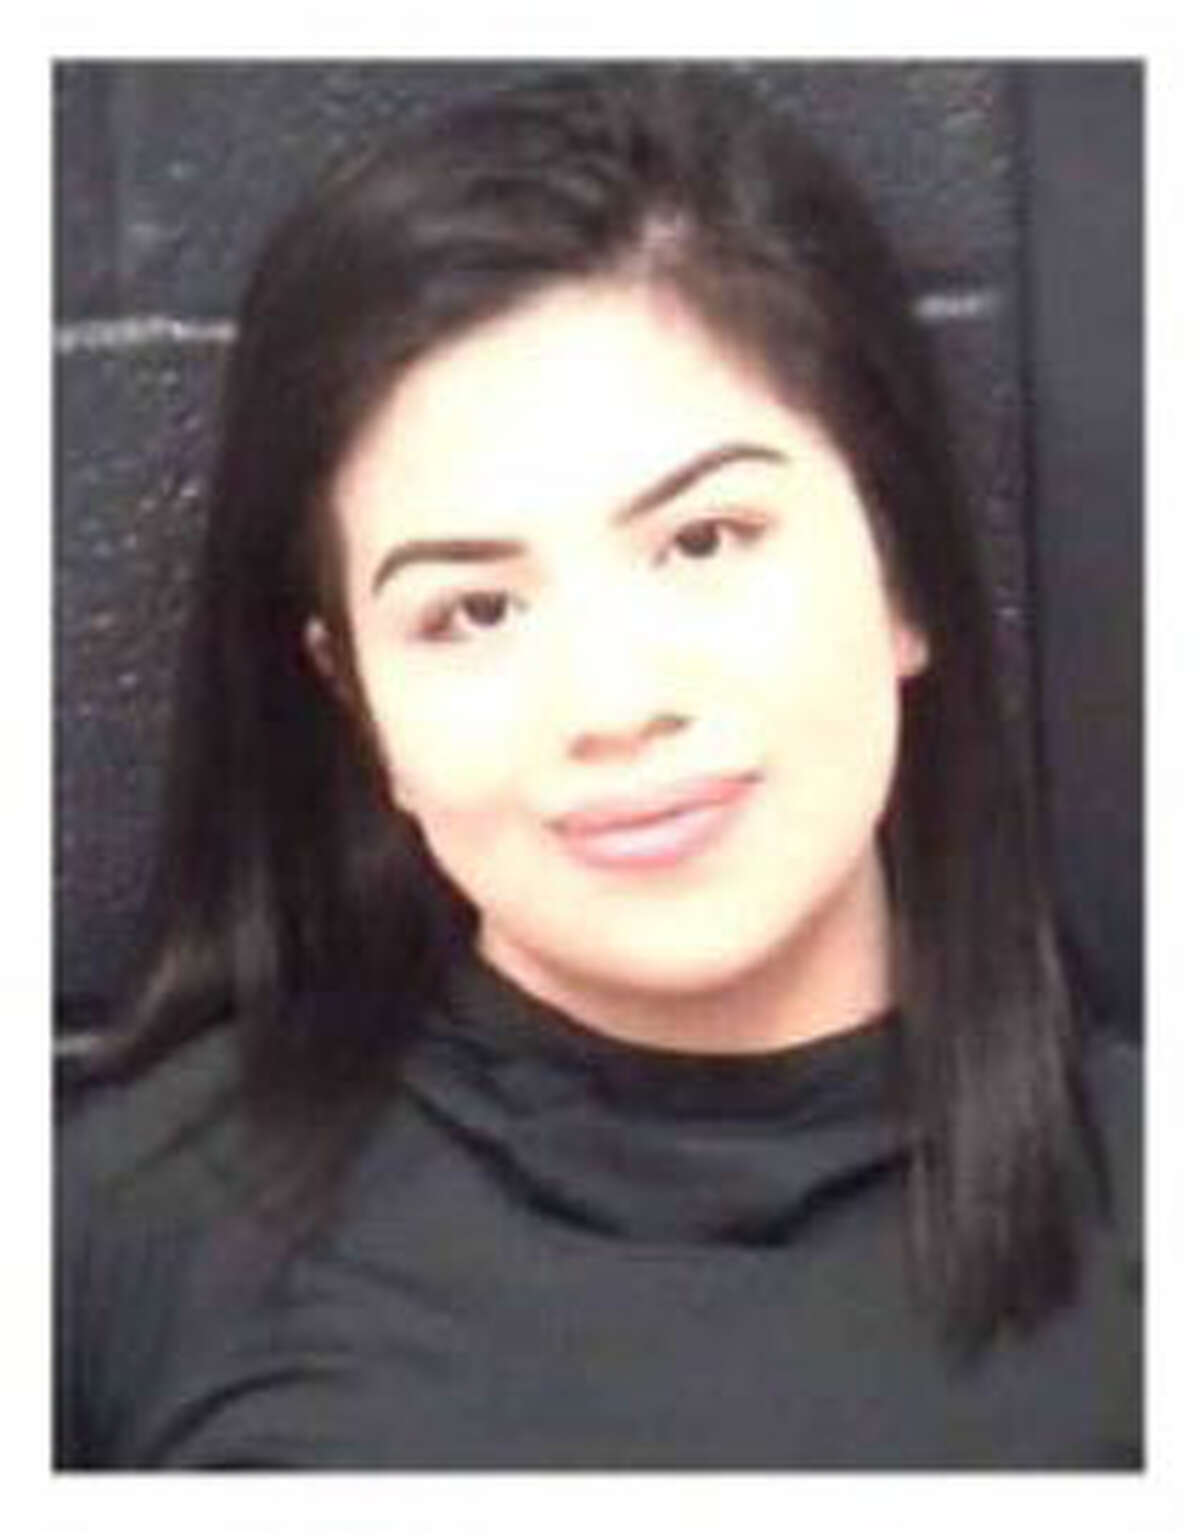 Amelia Batres, 22, was charged with attempt to bring and conspire to bring an illegal immigrant for financial gain.